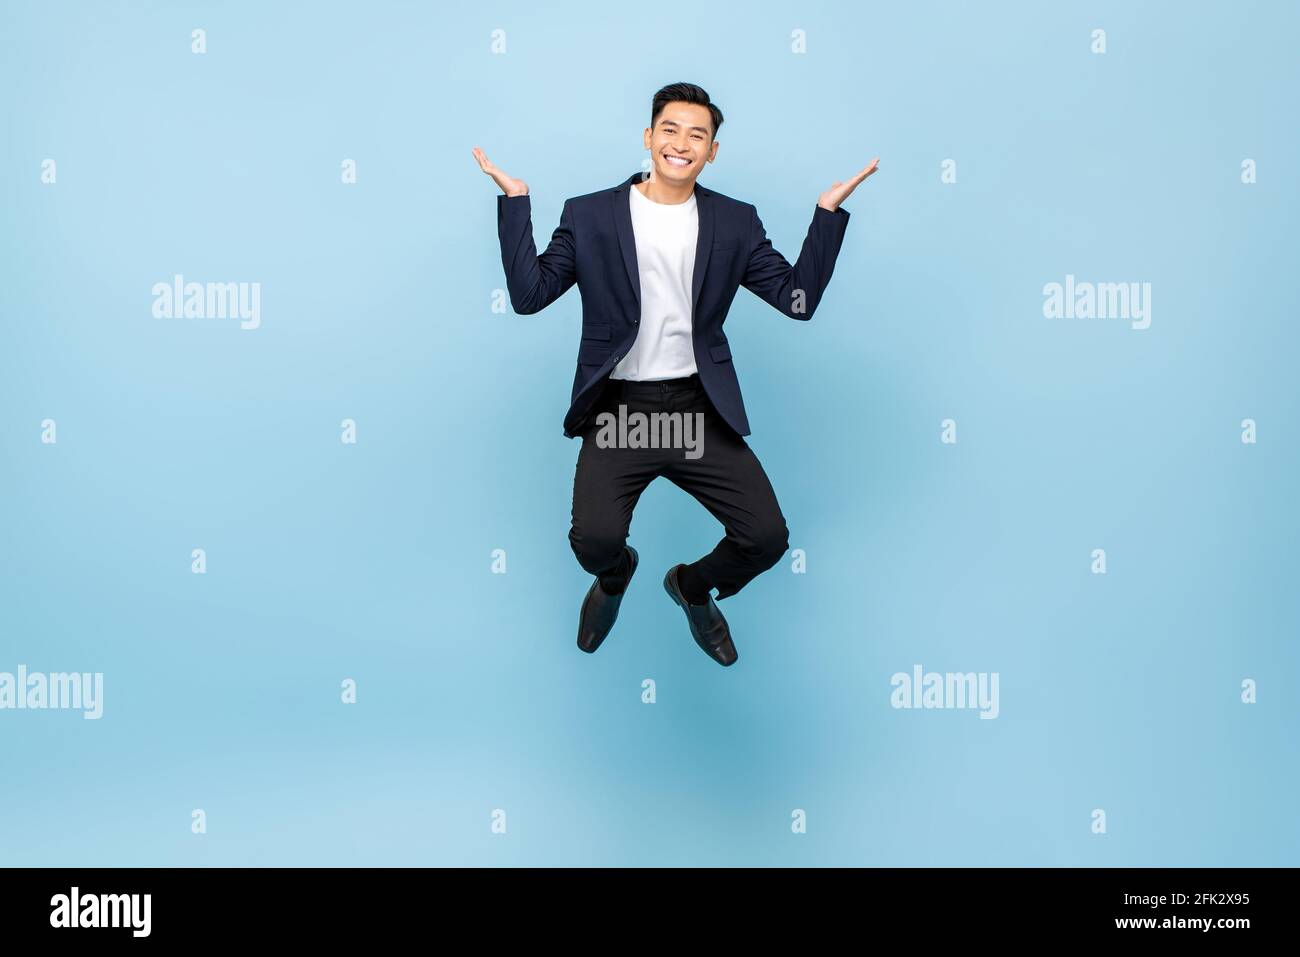 Full lenght portrait of happy Asian man jumping and smiling with open hands on isolated light blue studio background Stock Photo